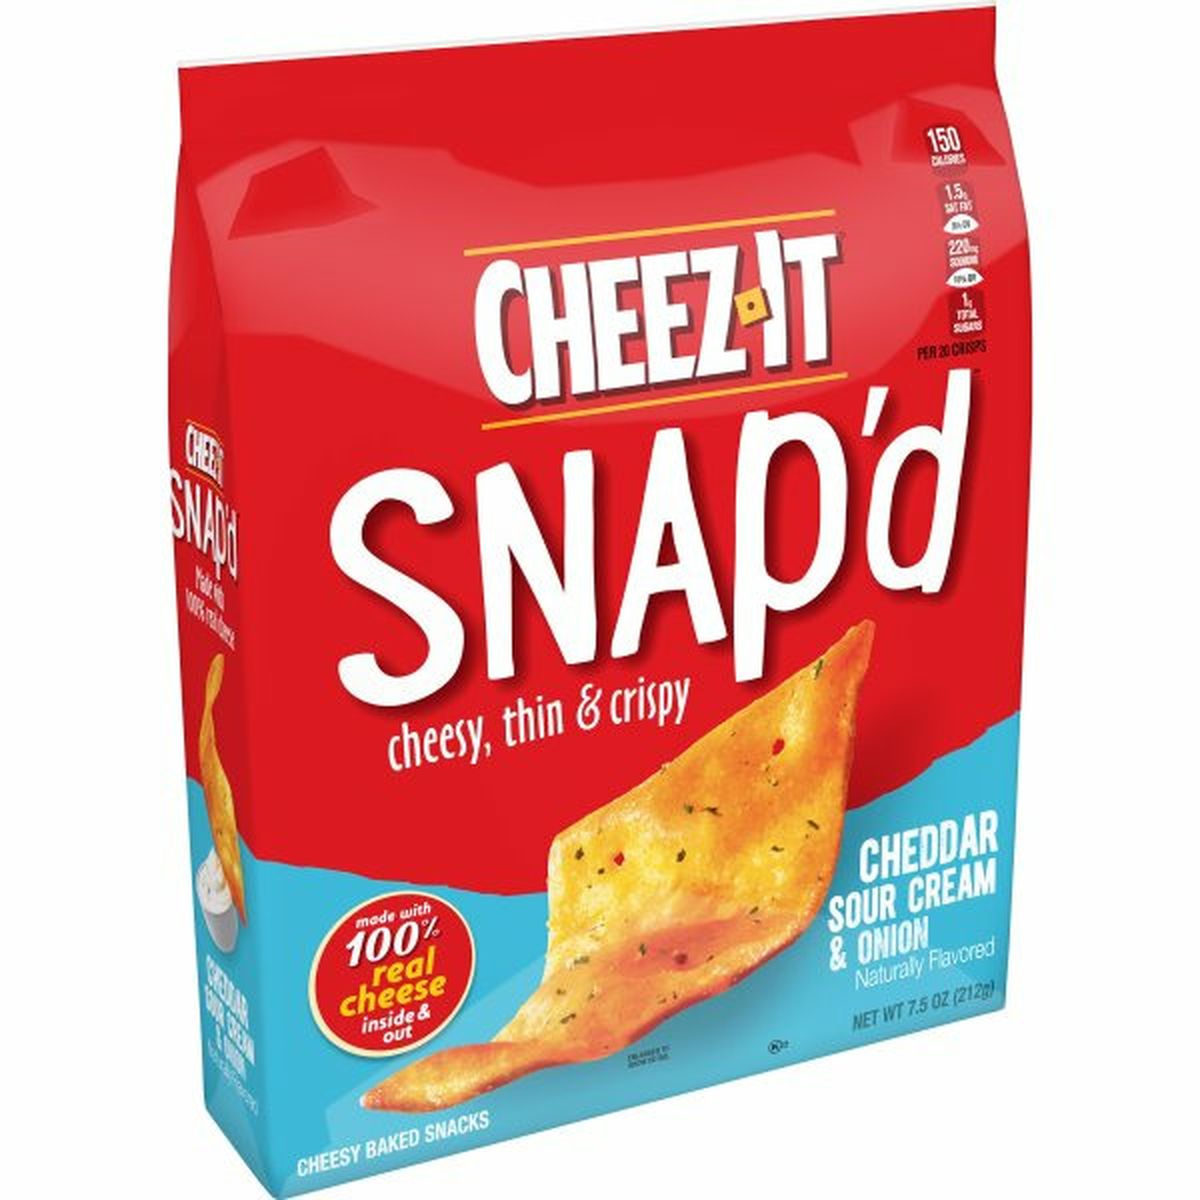 Calories in Cheez-It Crackers Cheez-It Cheesy Baked Snacks, Cheddar Sour Cream and Onion, 7.5oz